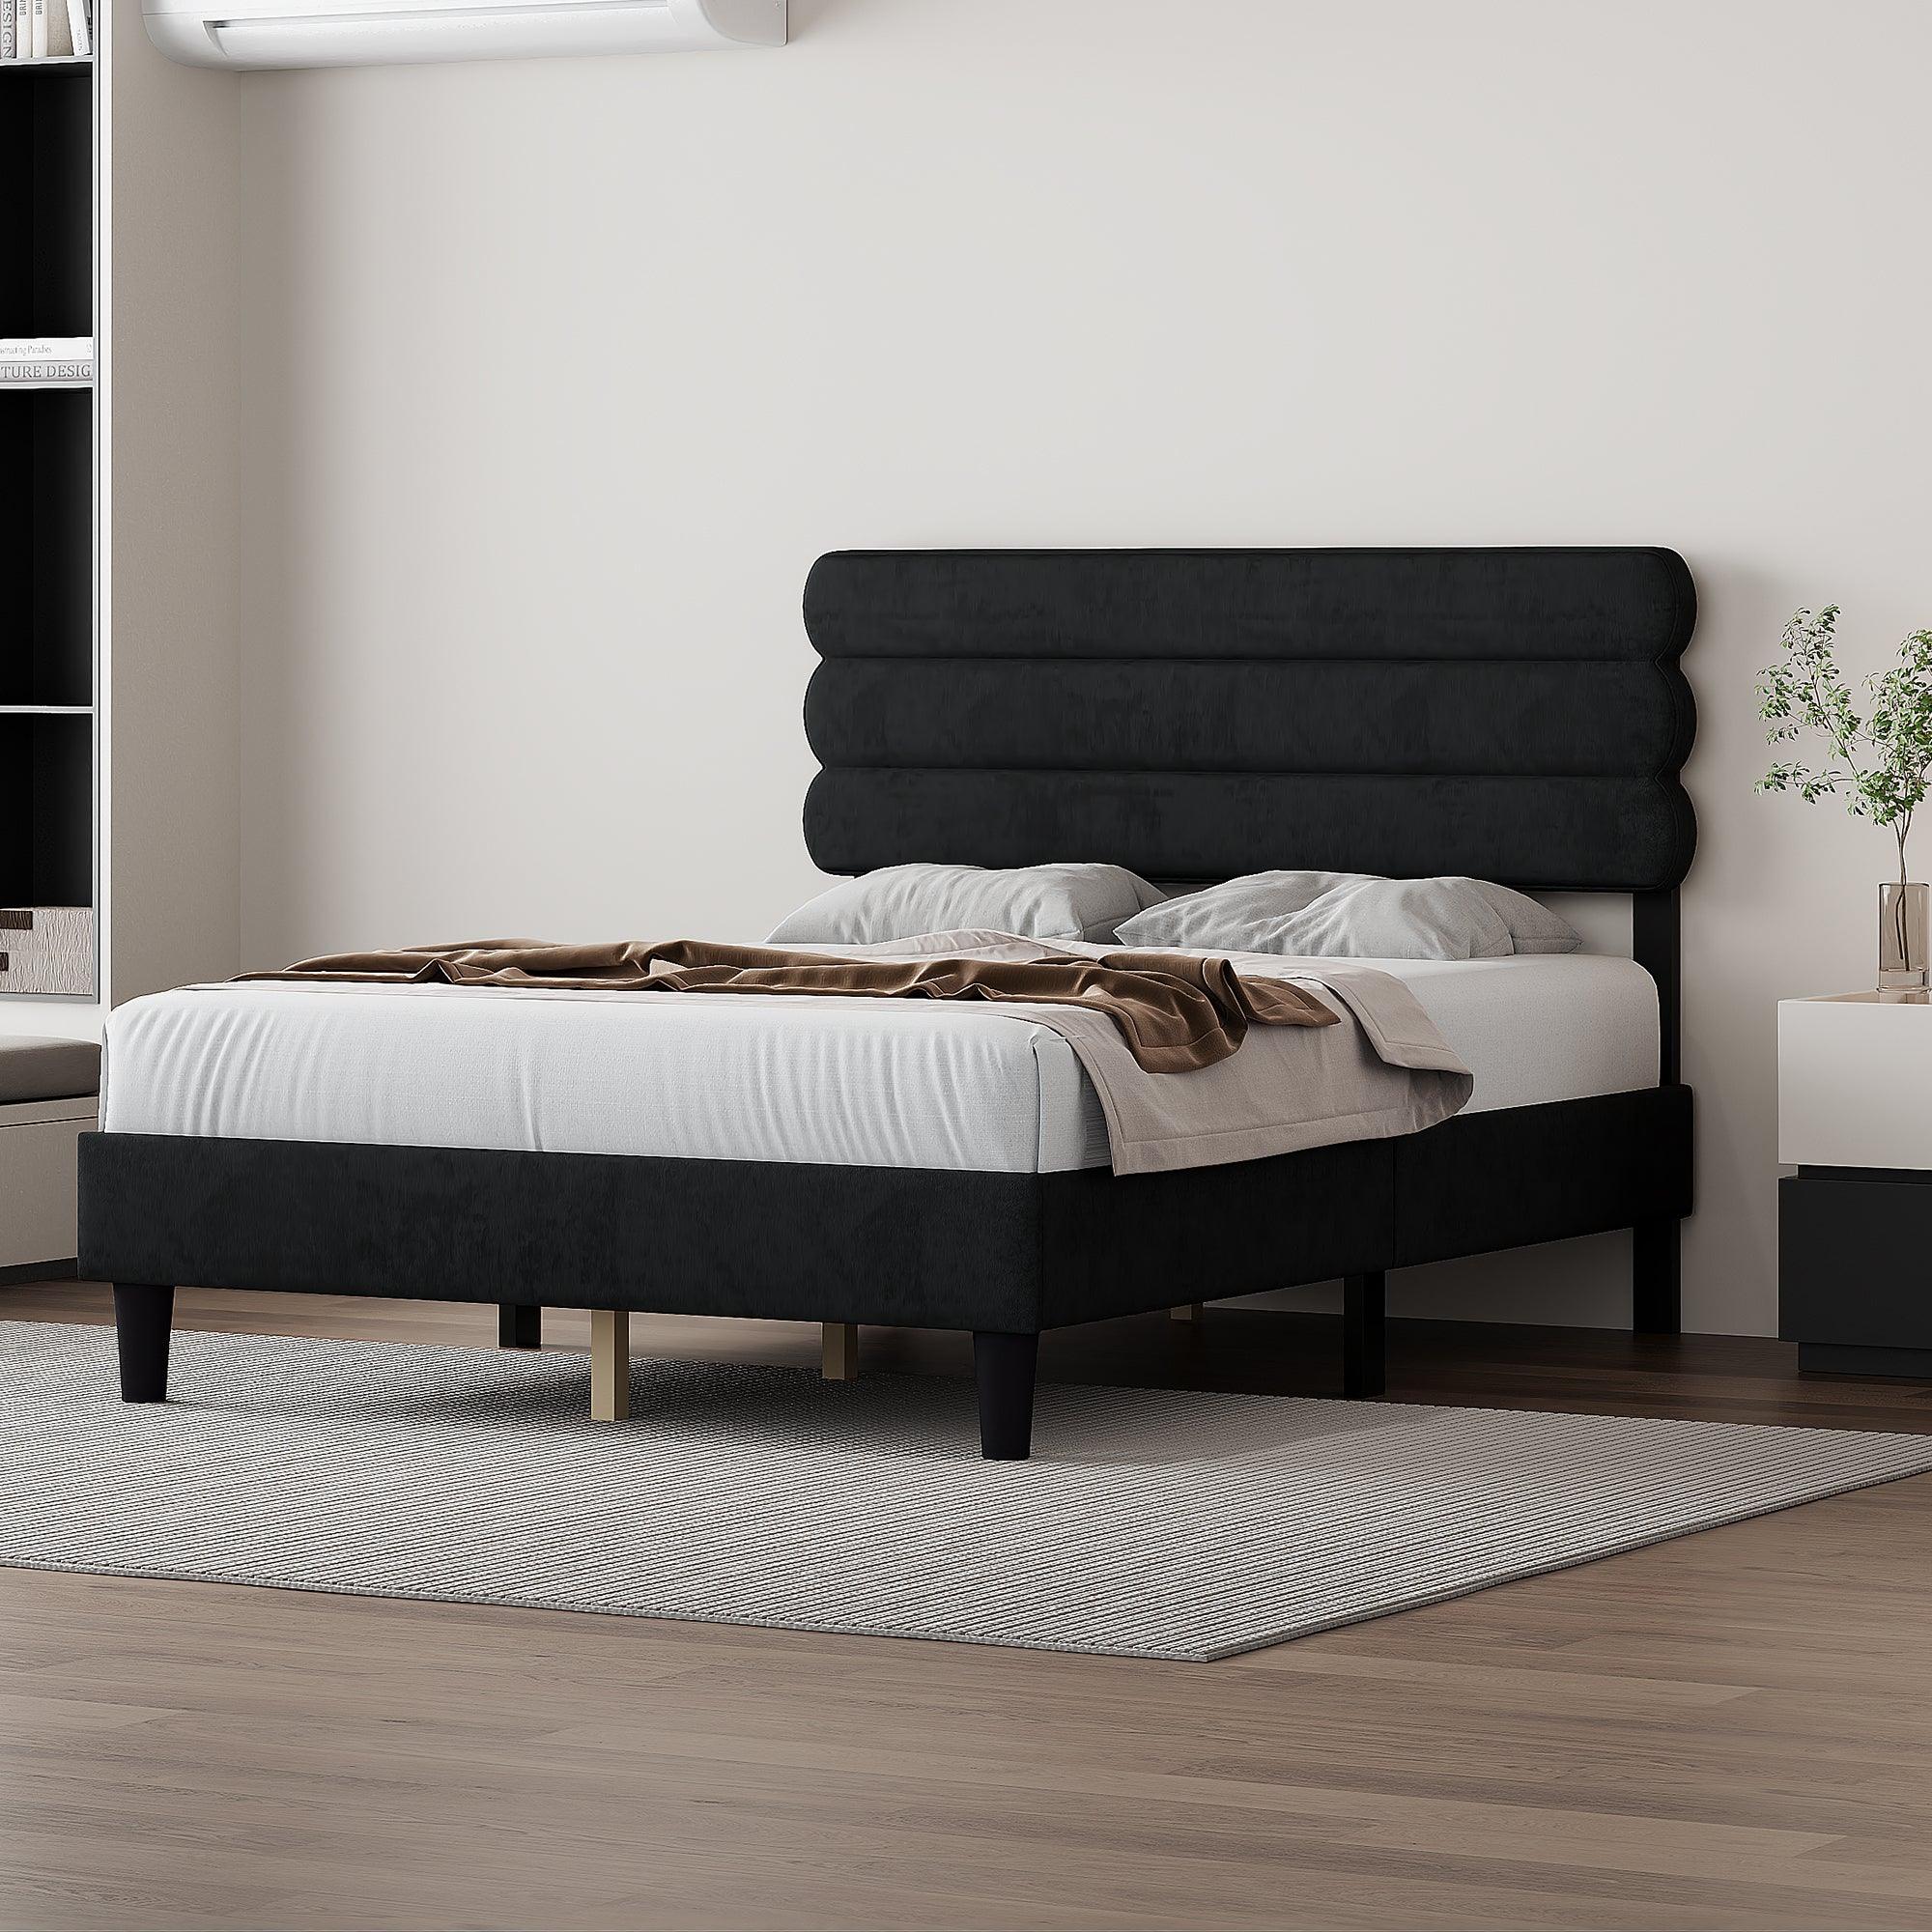 🆓🚛 Queen Bed Frame With Headboard, Sturdy Platform Bed With Wooden Slats Support, Easy Assembly, Dark Gray